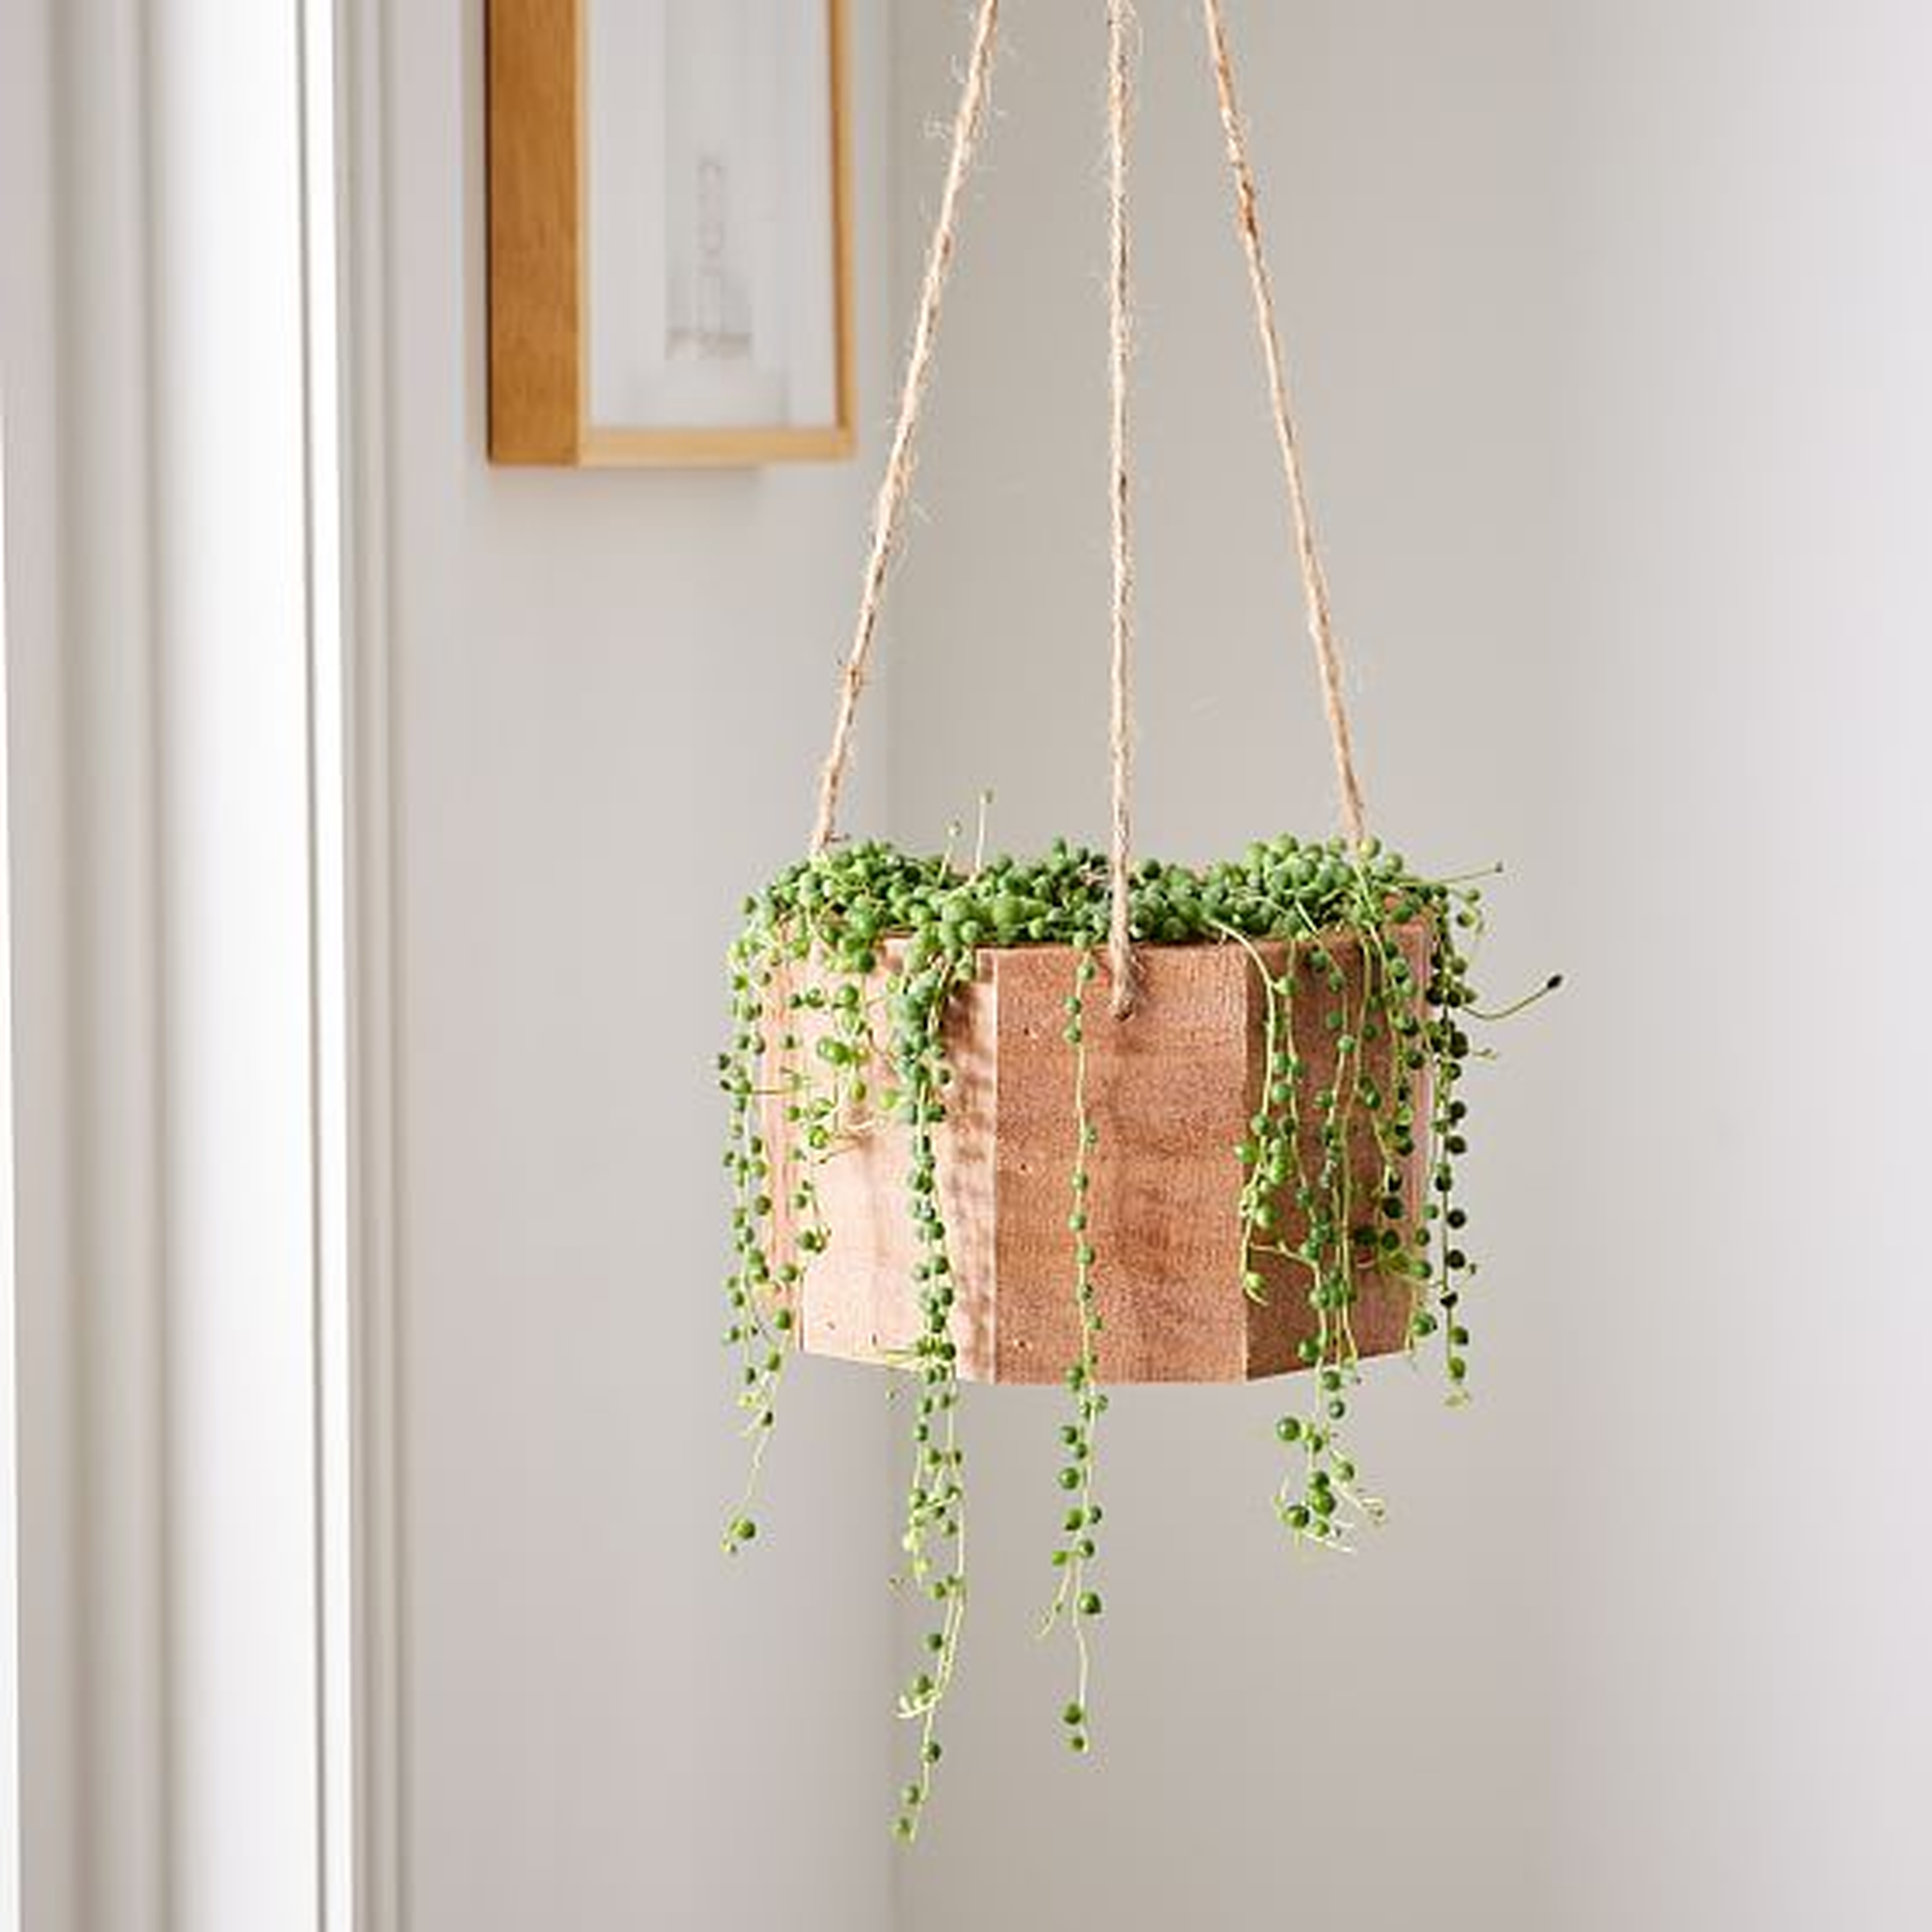 6" Succulent String of Pearls in Hanging Planter - West Elm